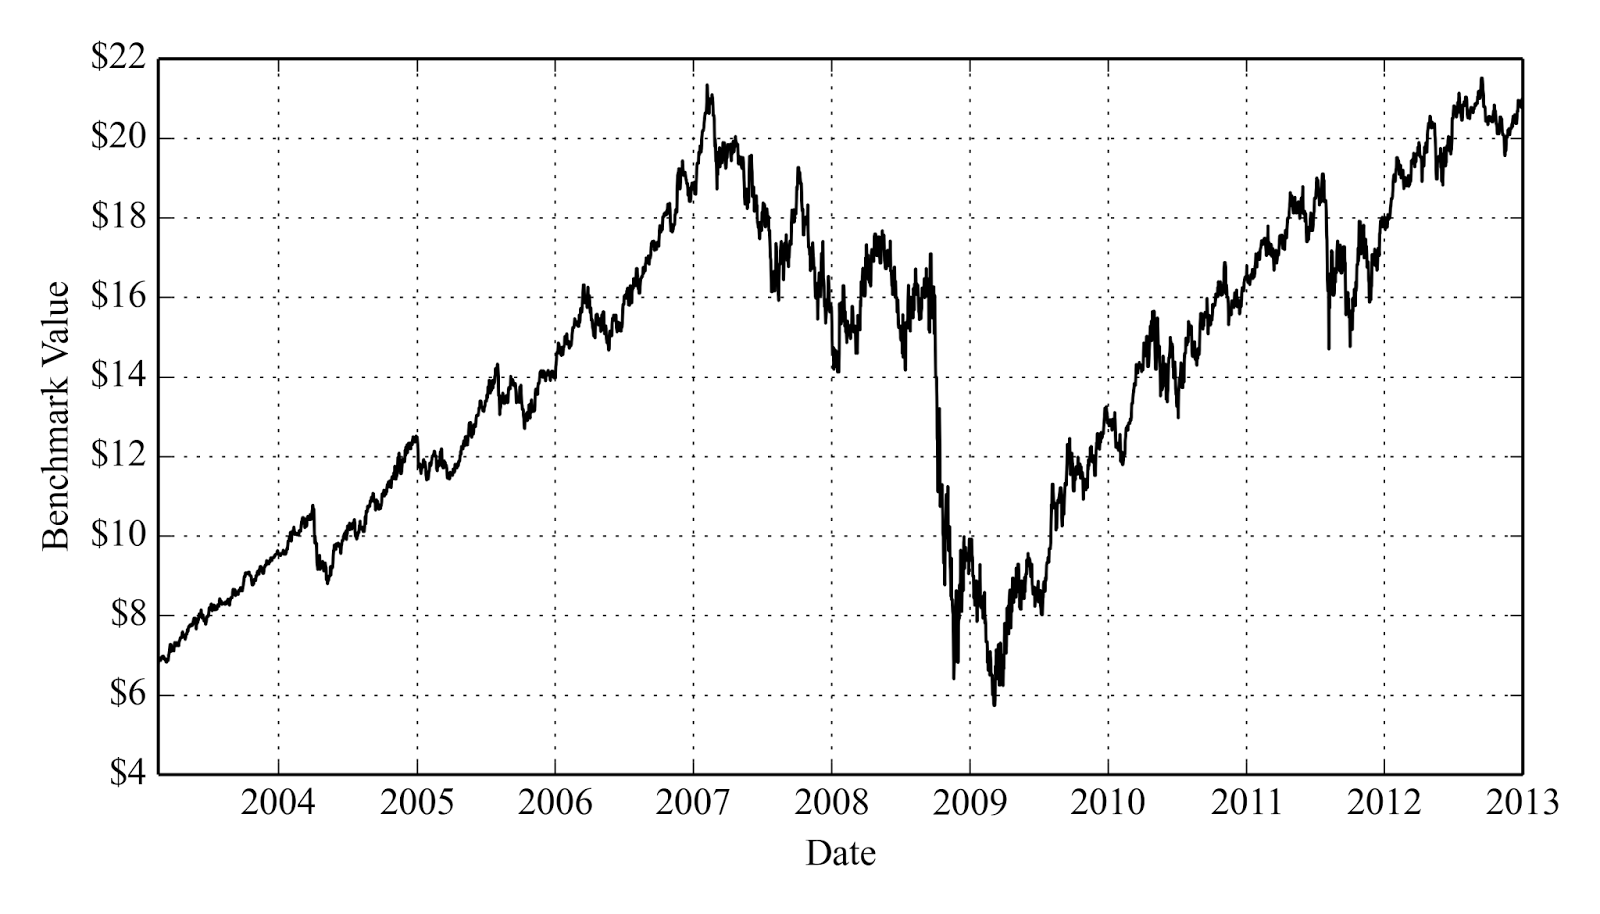 A figure showing a line graph demonstrating split and dividend adjusted Vanguard REIT Index Fund (VGSIX) share price from 2004 to 2013.